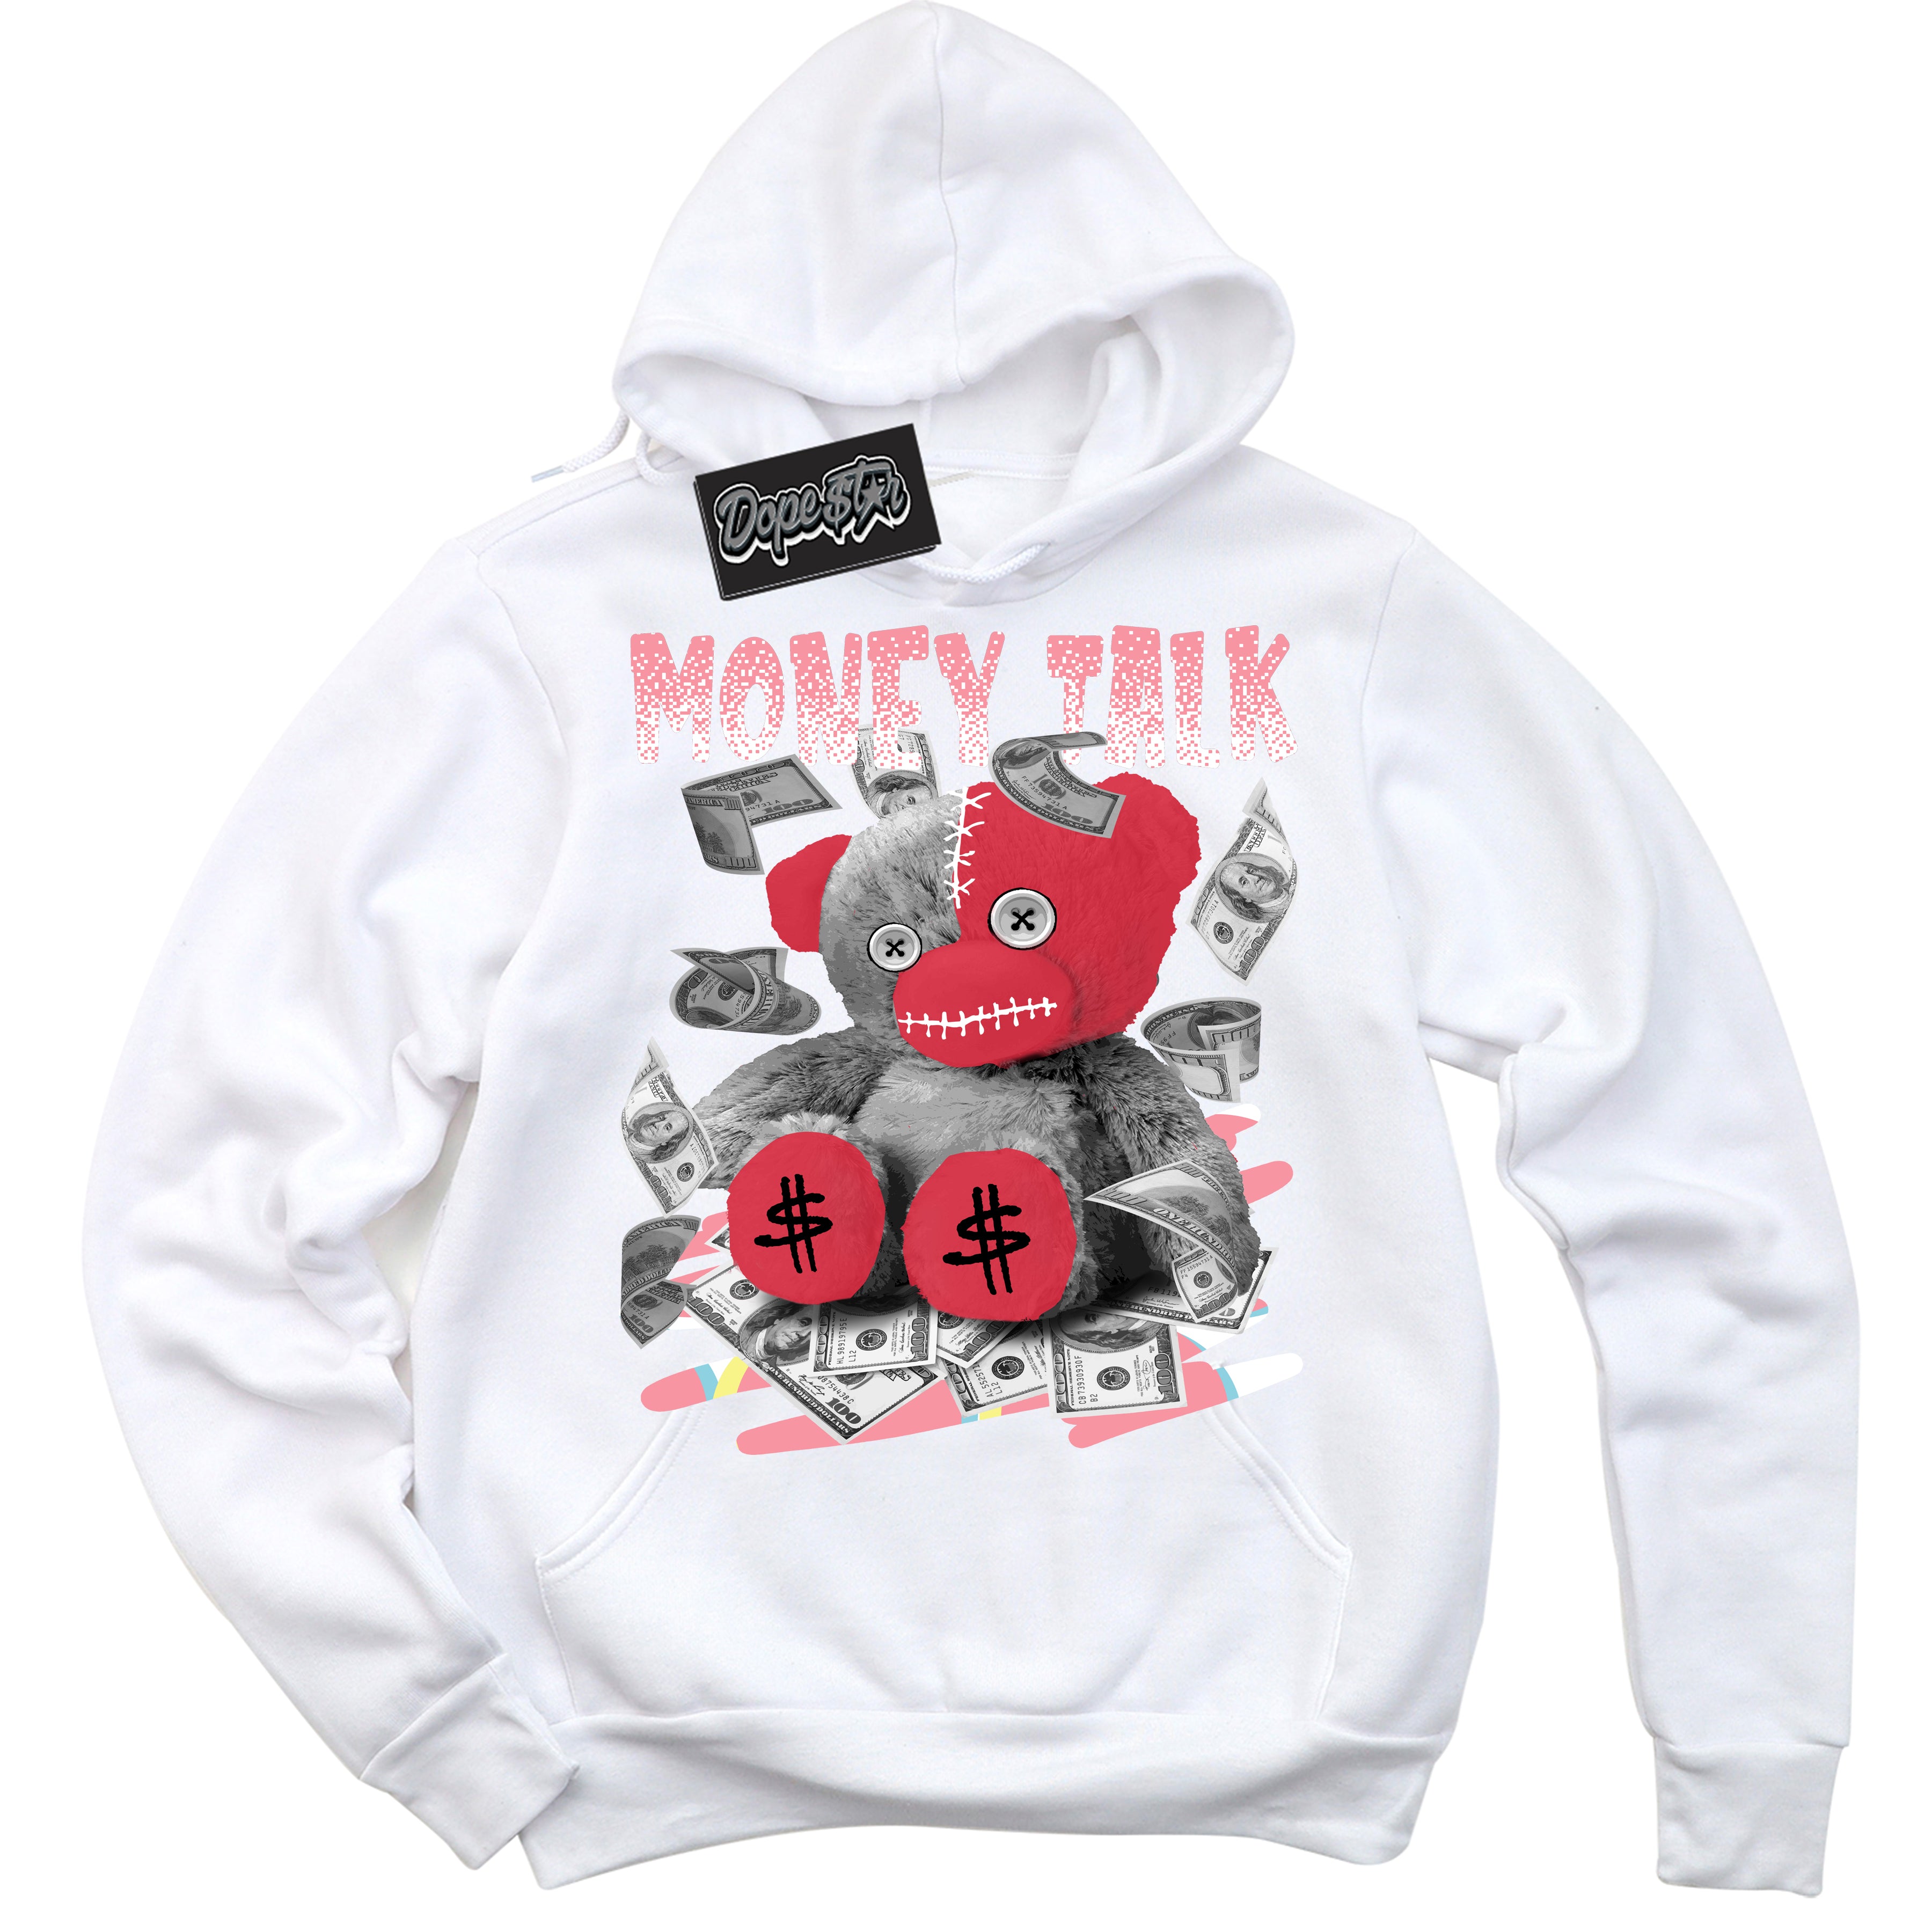 Cool White Graphic DopeStar Hoodie with “ Money Talk Bear “ print, that perfectly matches Spider-Verse 1s sneakers